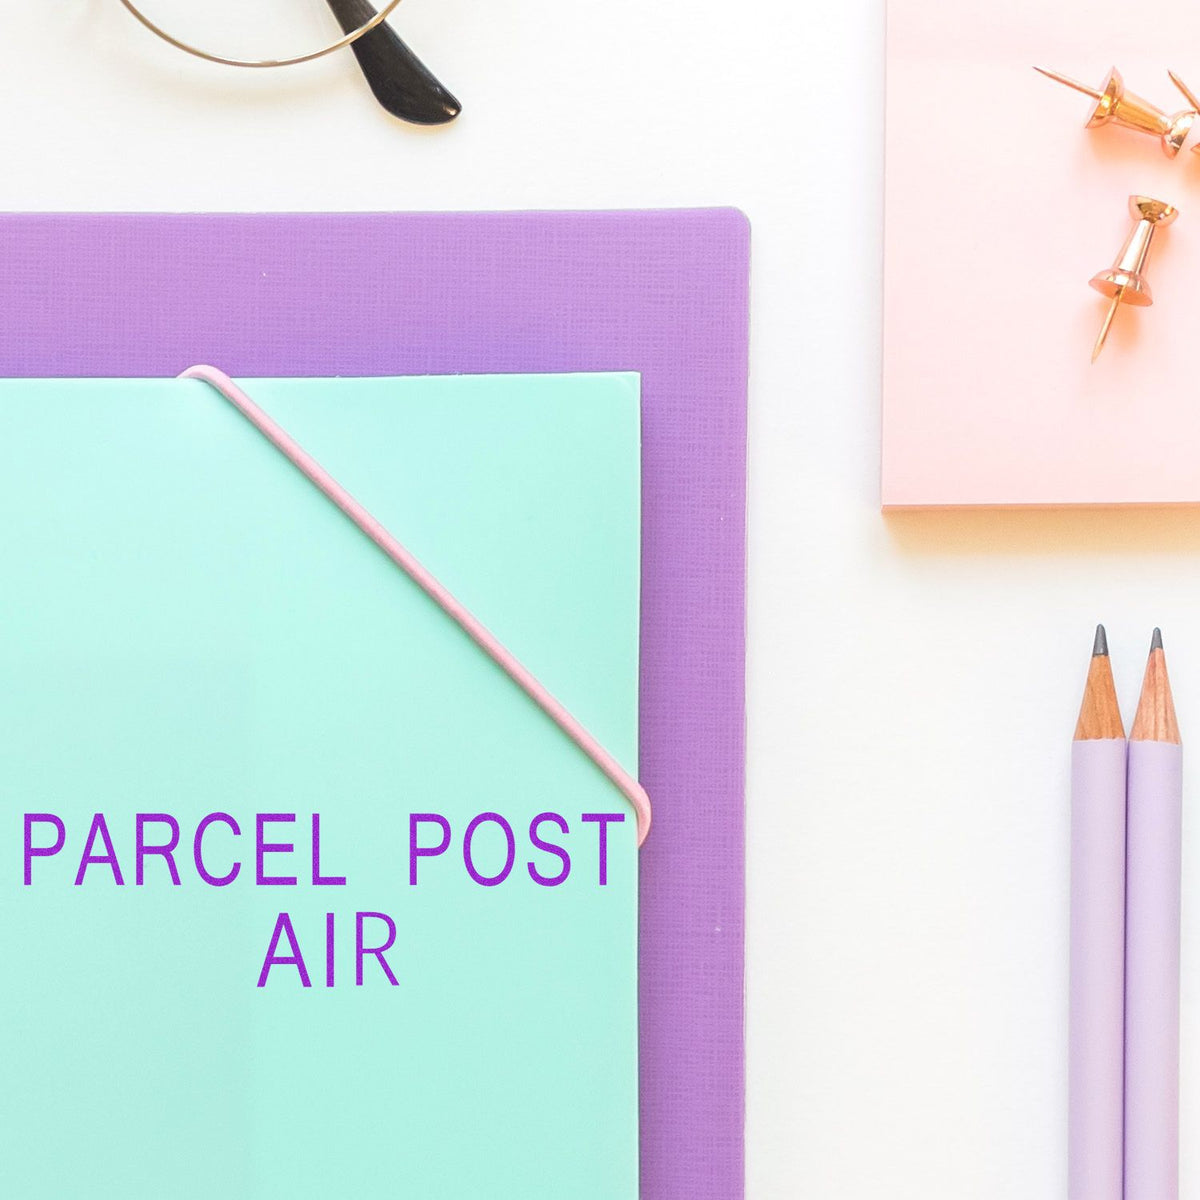 Parcel Post Air Rubber Stamp In Use